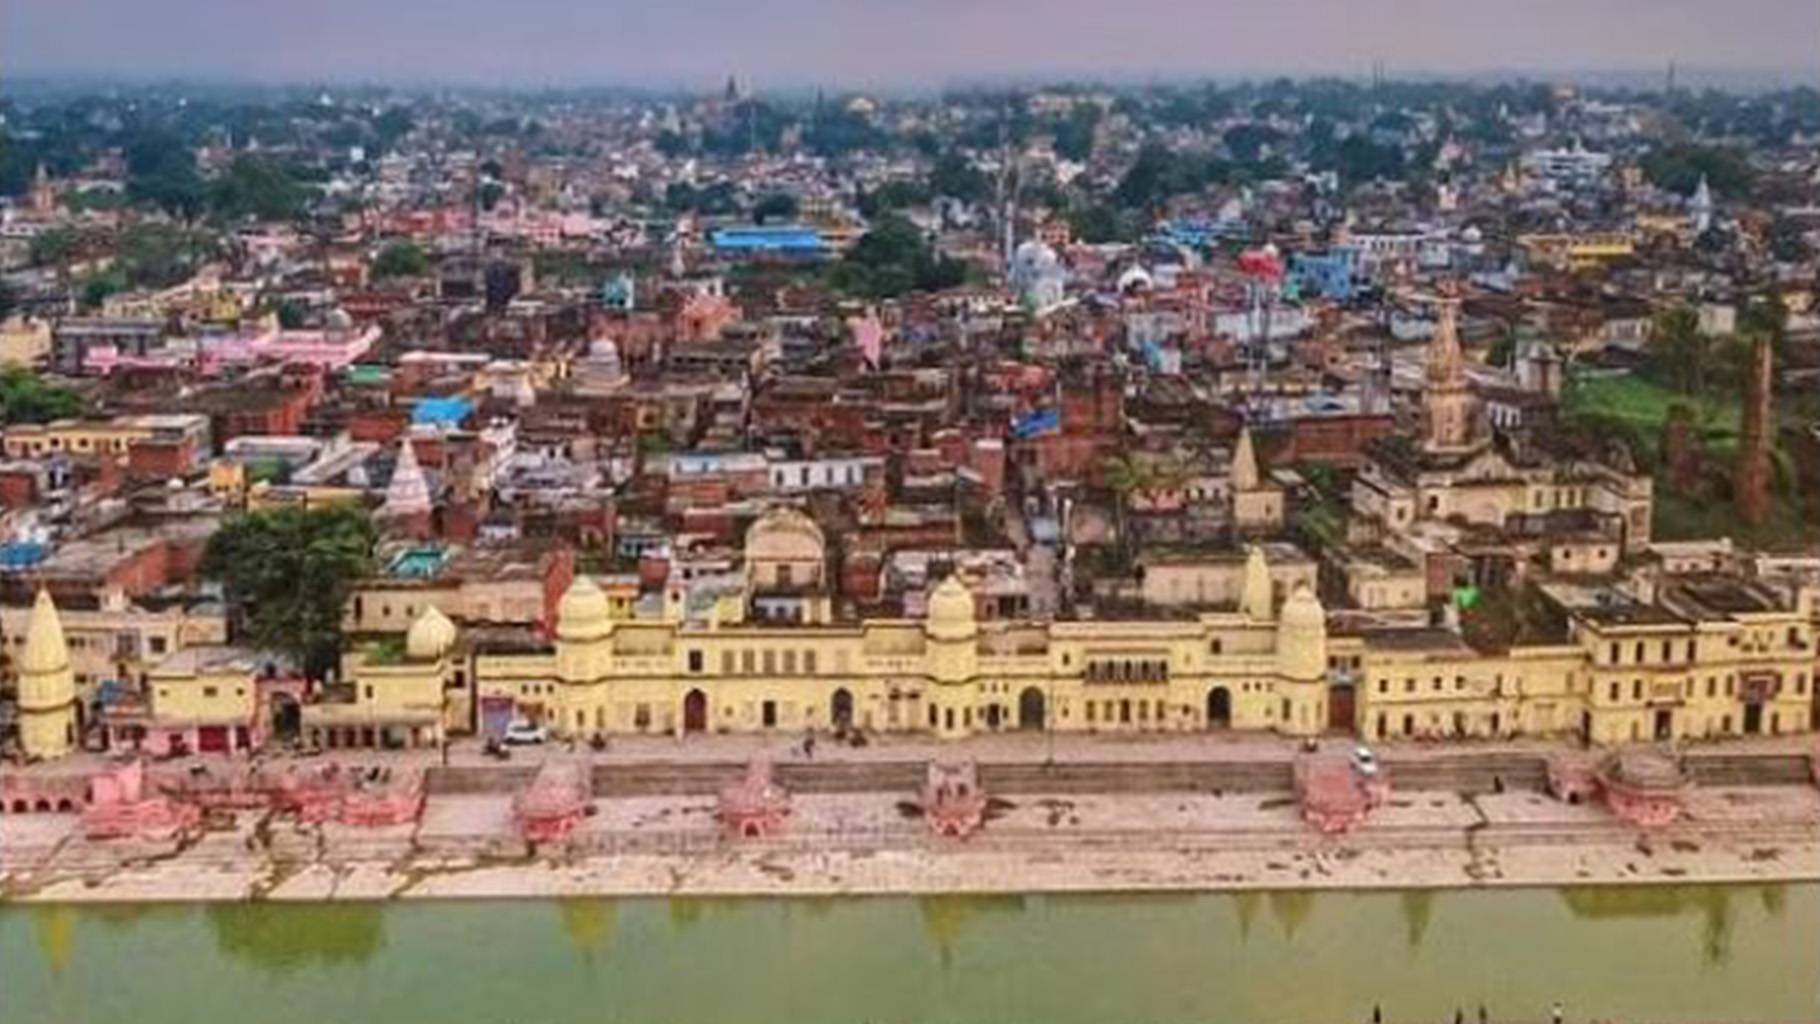 Ayodhya Set to Attract 50 Million Annual Tourists, Emerges as India’s Top Tourist Hub: Jefferies